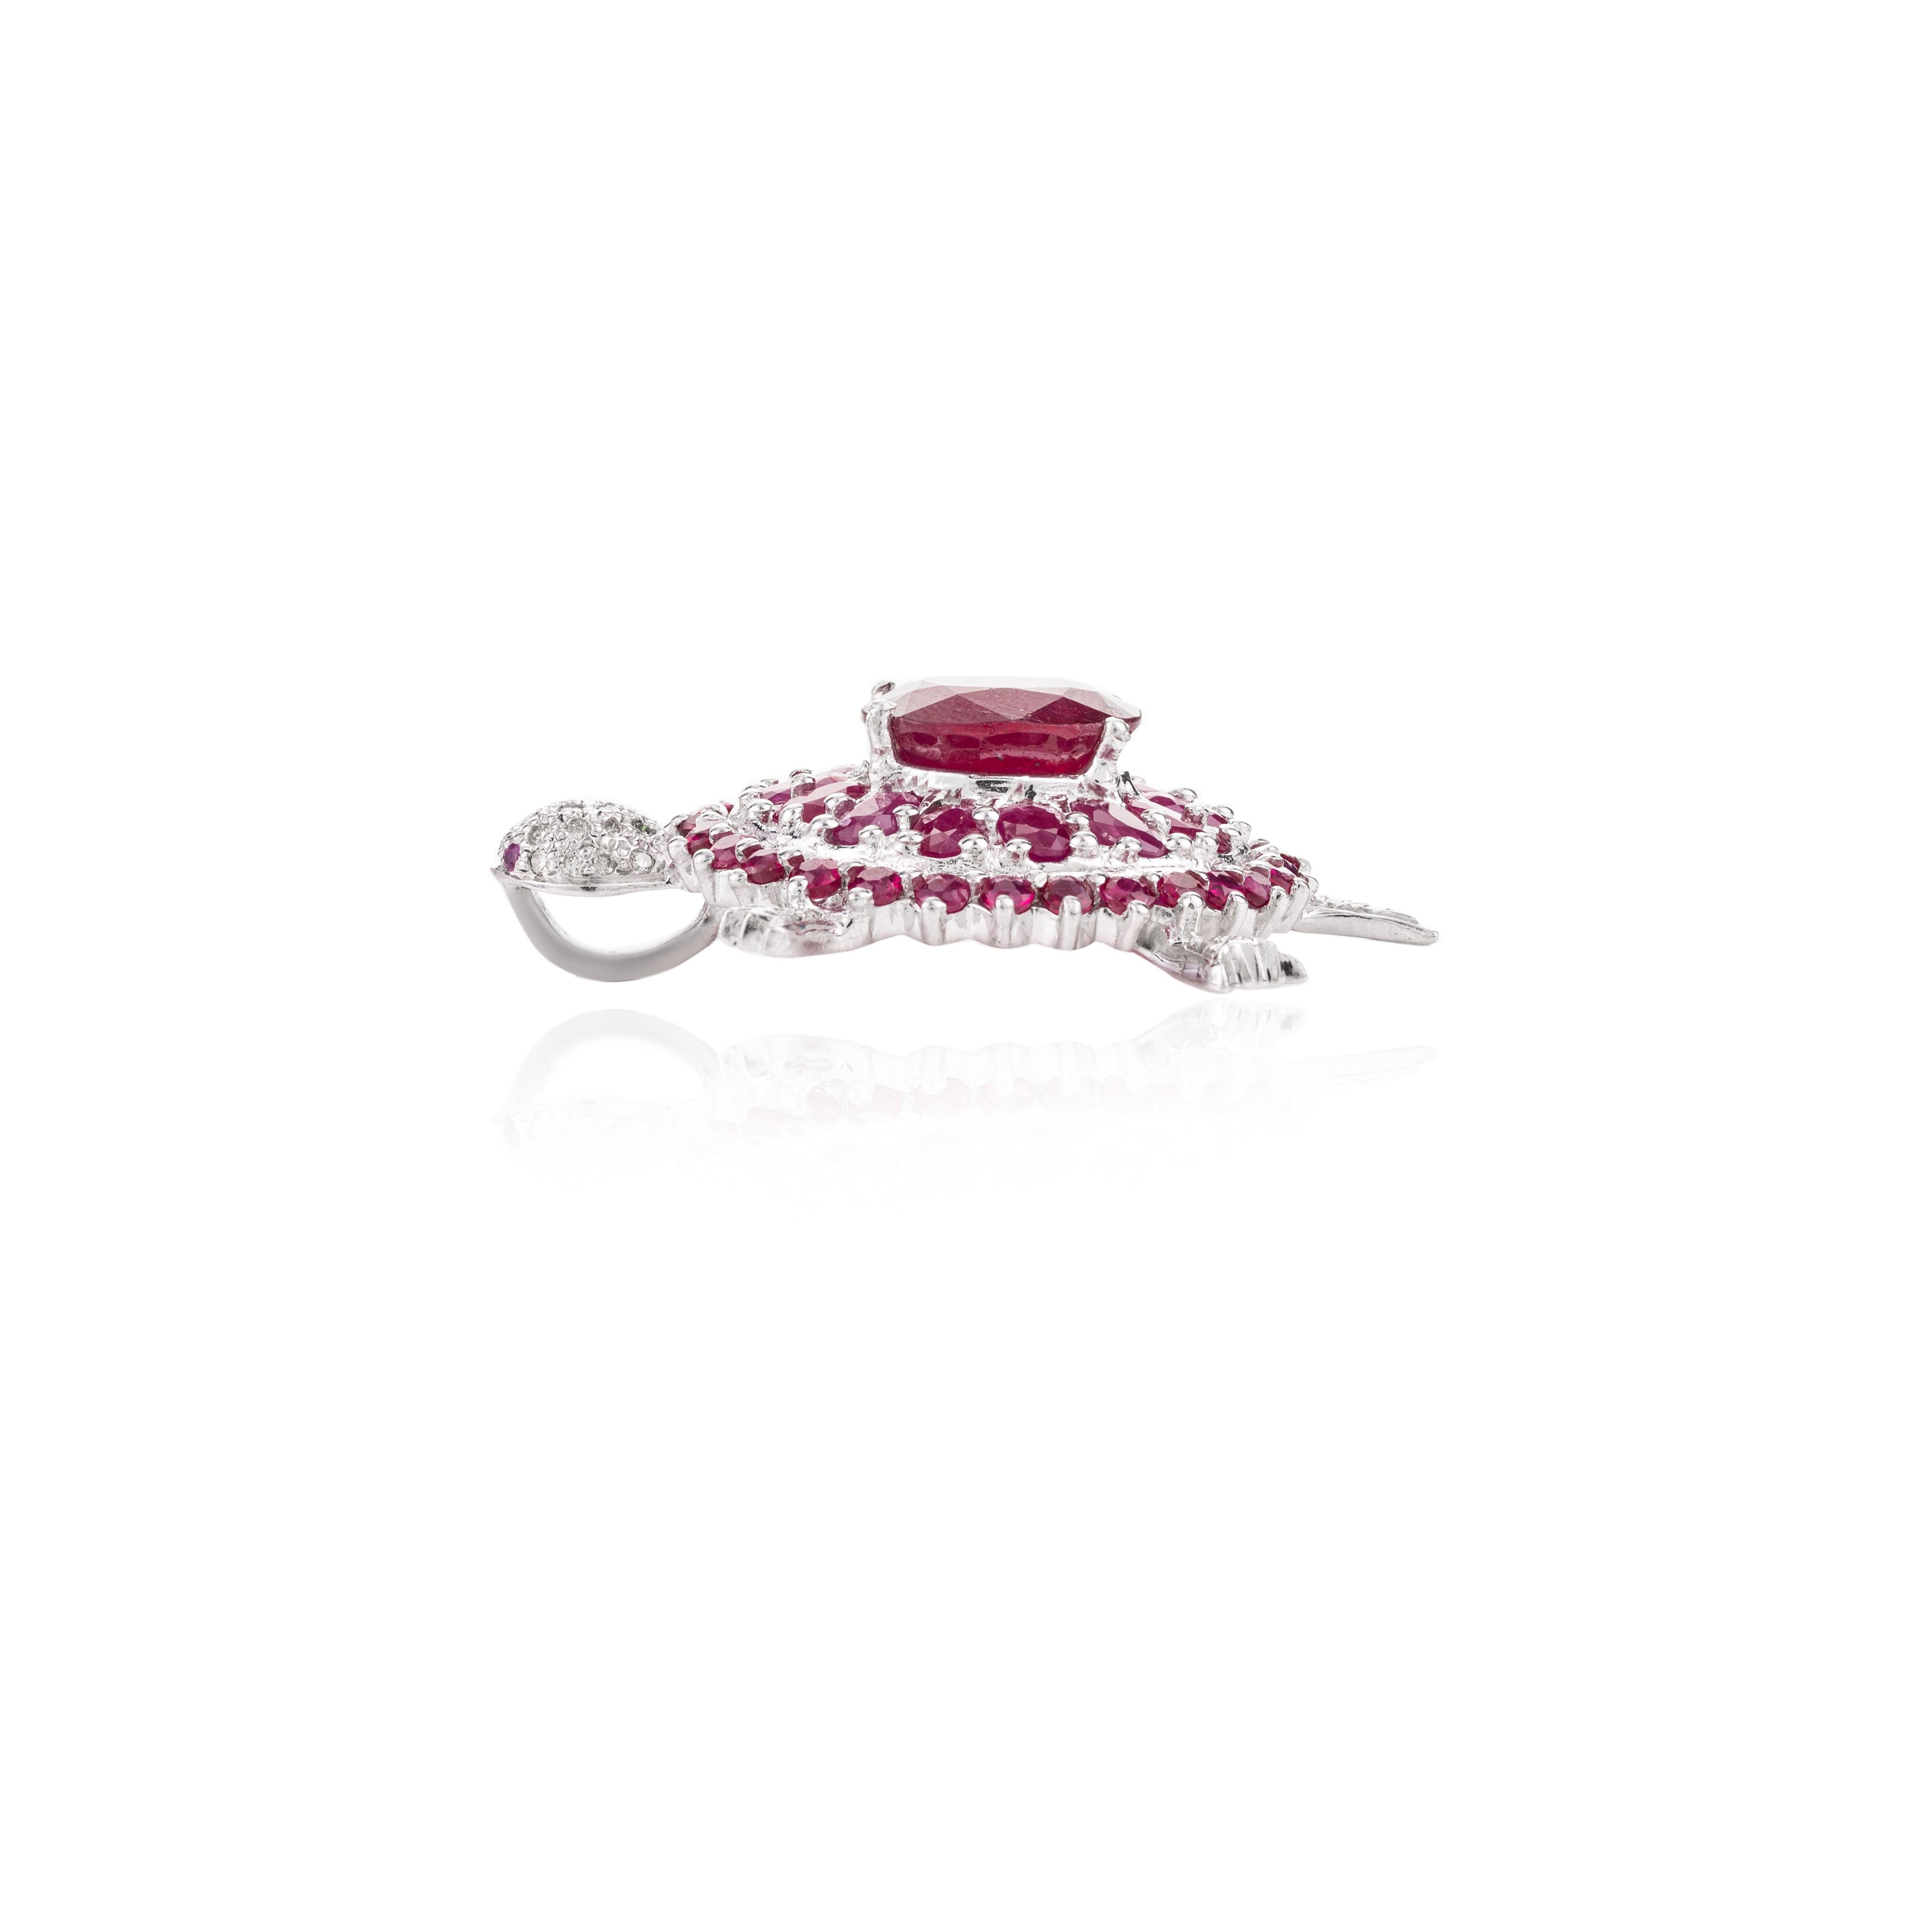 Mixed Cut 10.75 Carat Genuine Ruby Birthstone and Diamond Turtle Pendant in 925 Silver 